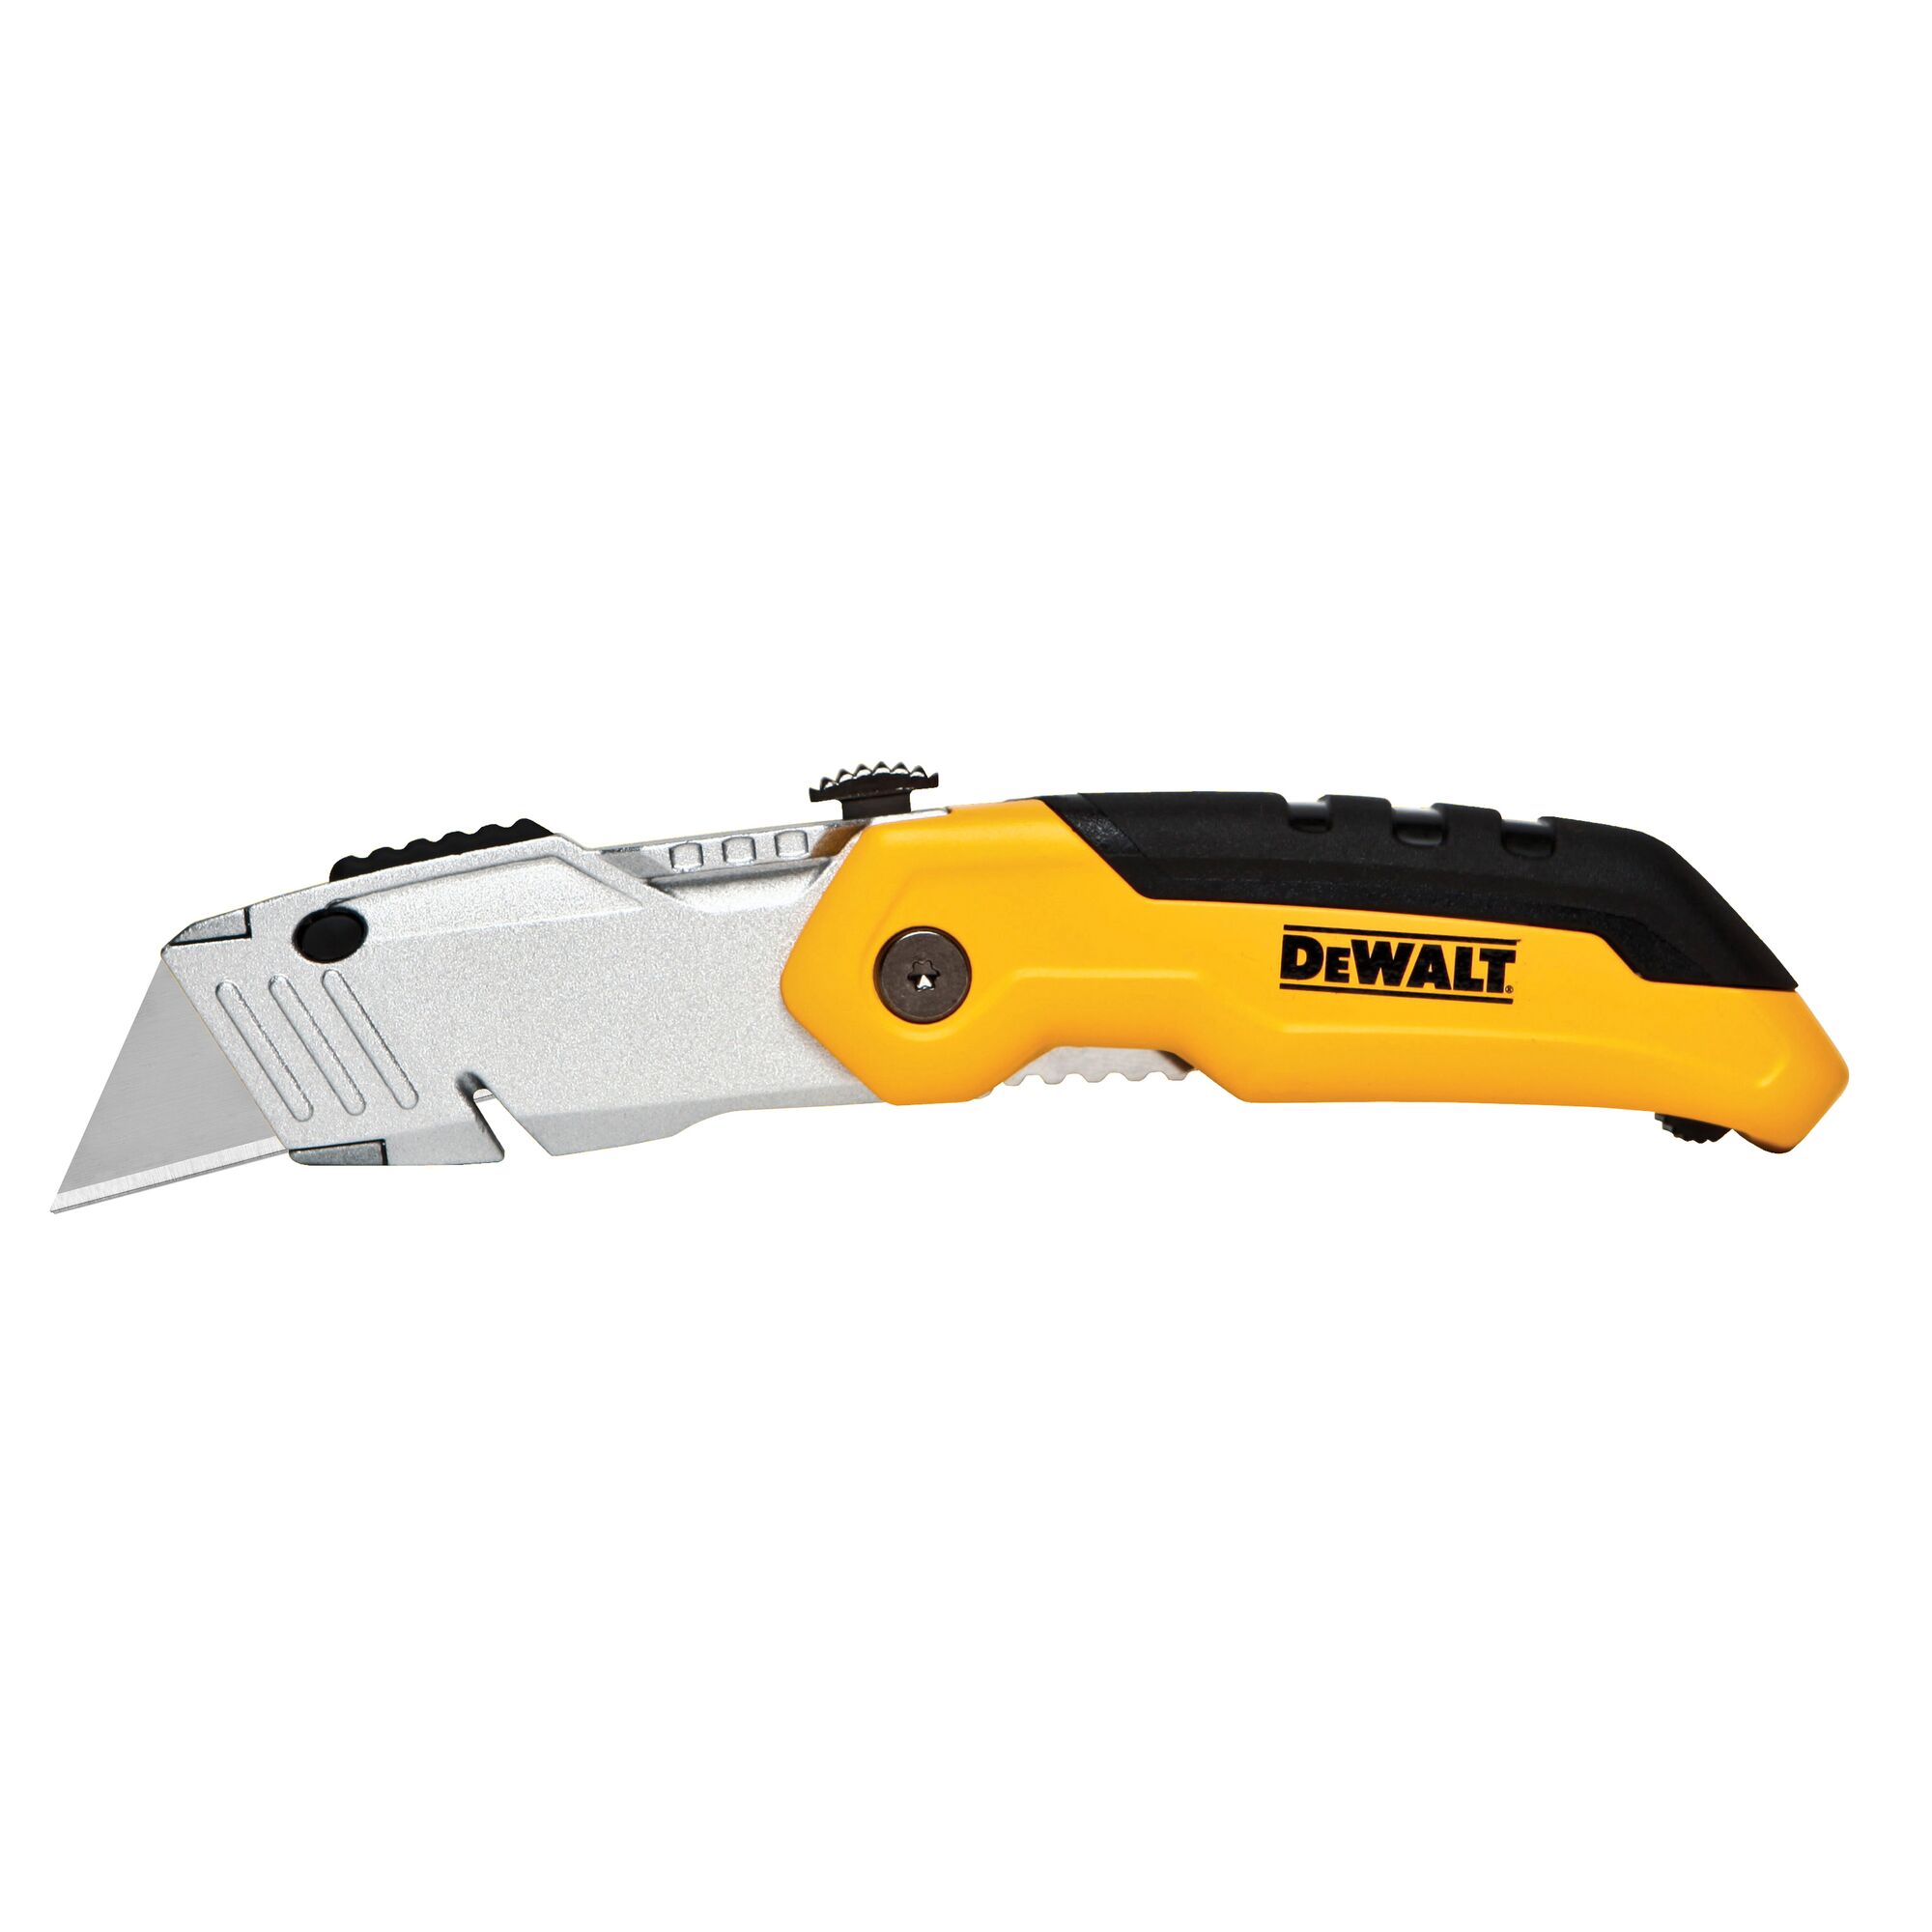 BOX CUTTER / UTILITY KNIFE - All Purpose, Retractable, Multi-Position Blade  - Home Planet Gear®